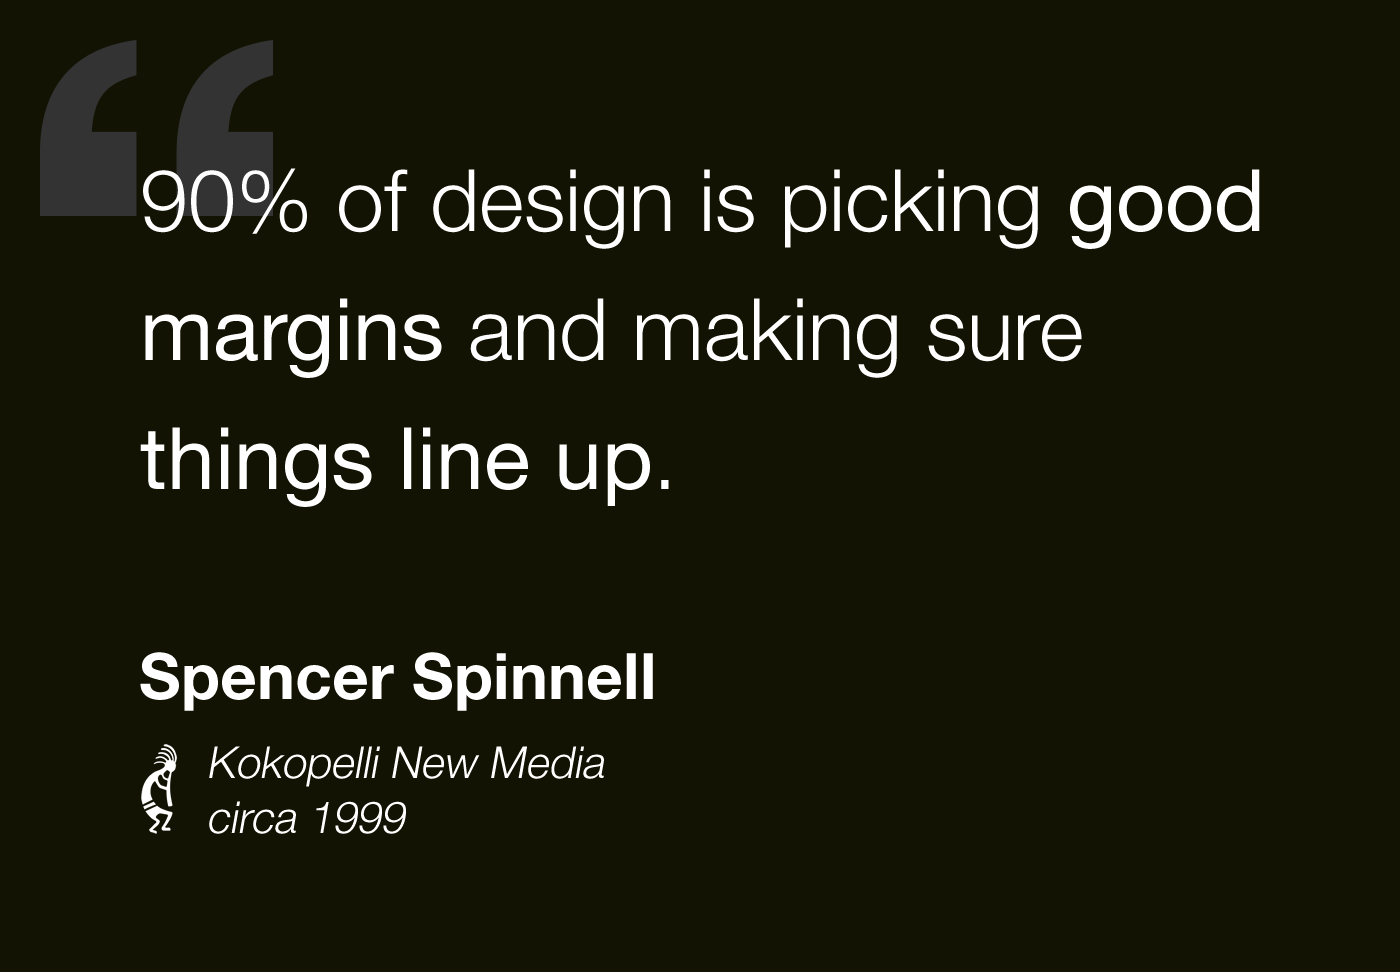 90% of design is picking good margins and making sure things line up.